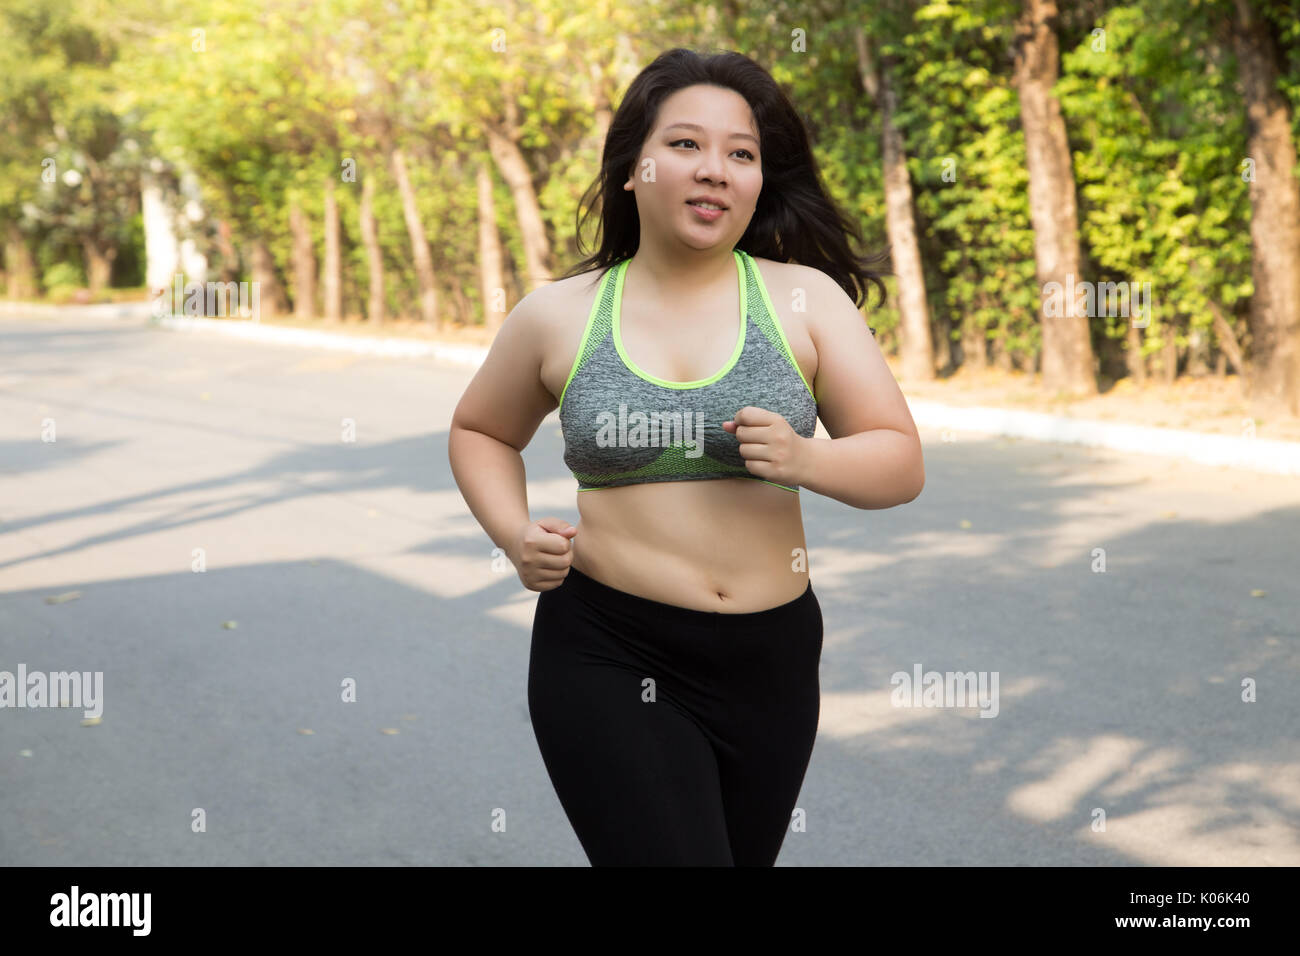 fat-woman-running-exercise-smile-face-in-park-weight-loss-concept-K06K40.jpg